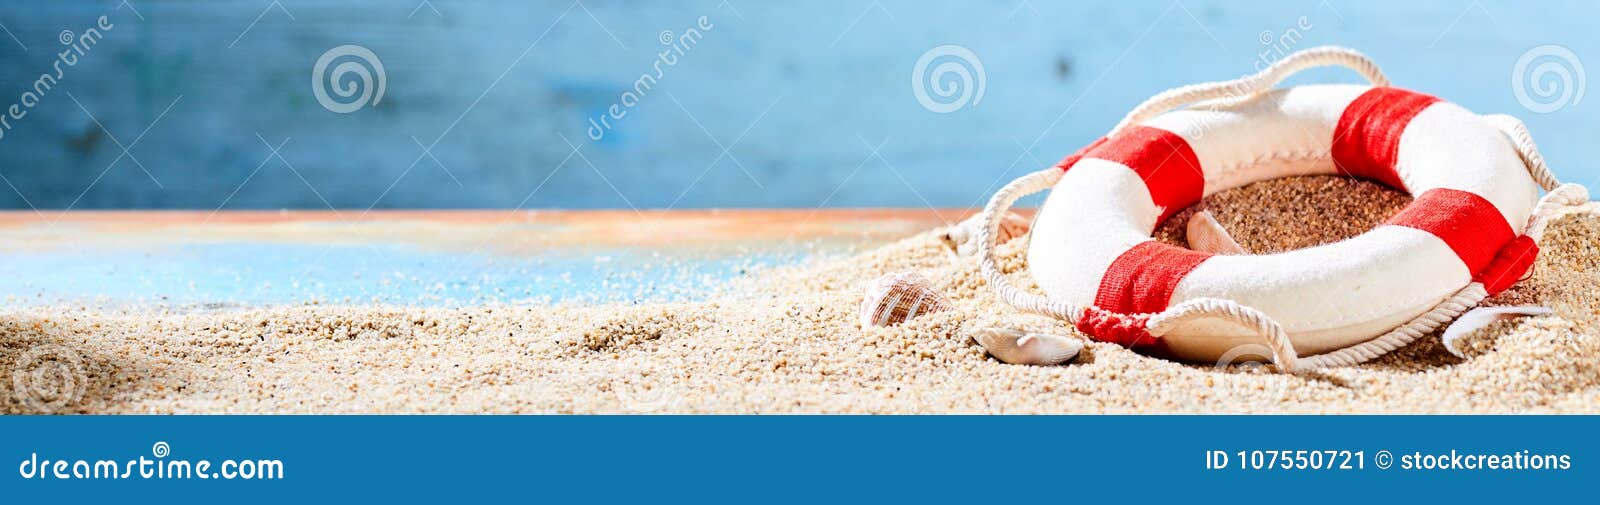 summer vacations and tropical beach banner